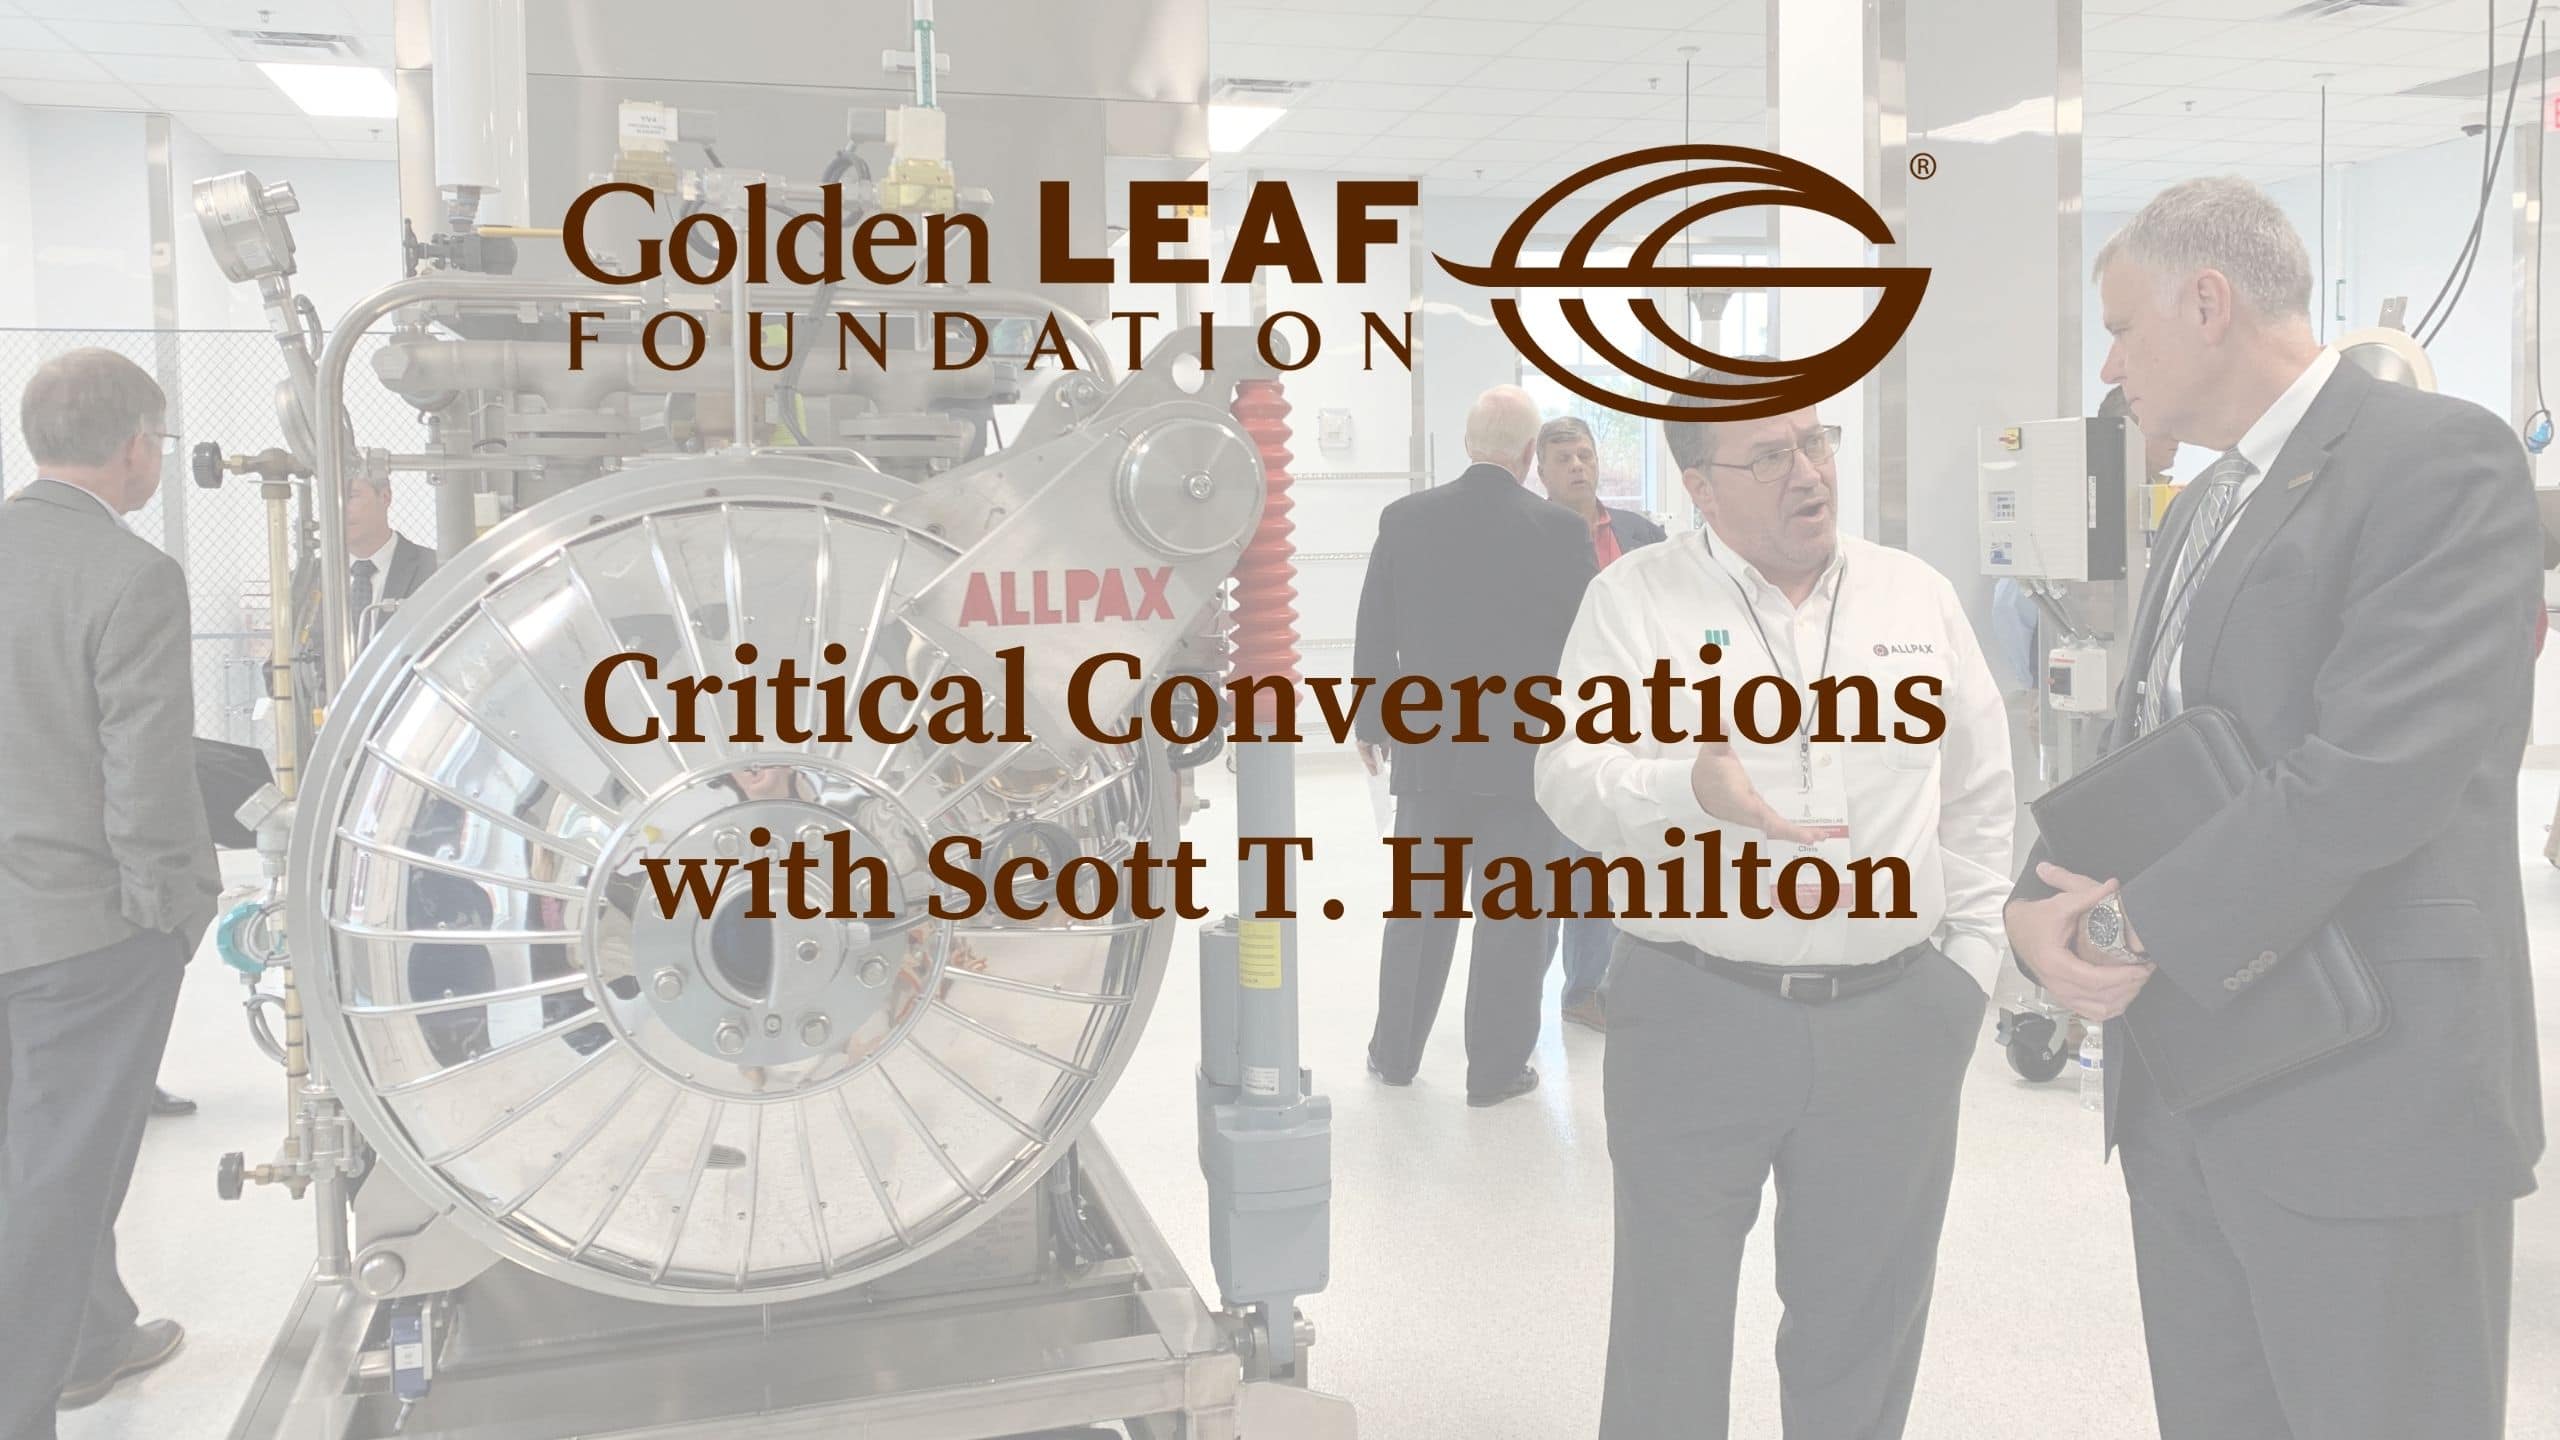 Critical Conversations with Scott T. Hamilton featuring Carl Warren, President and Chief Executive Officer of the North Carolina Railroad Company